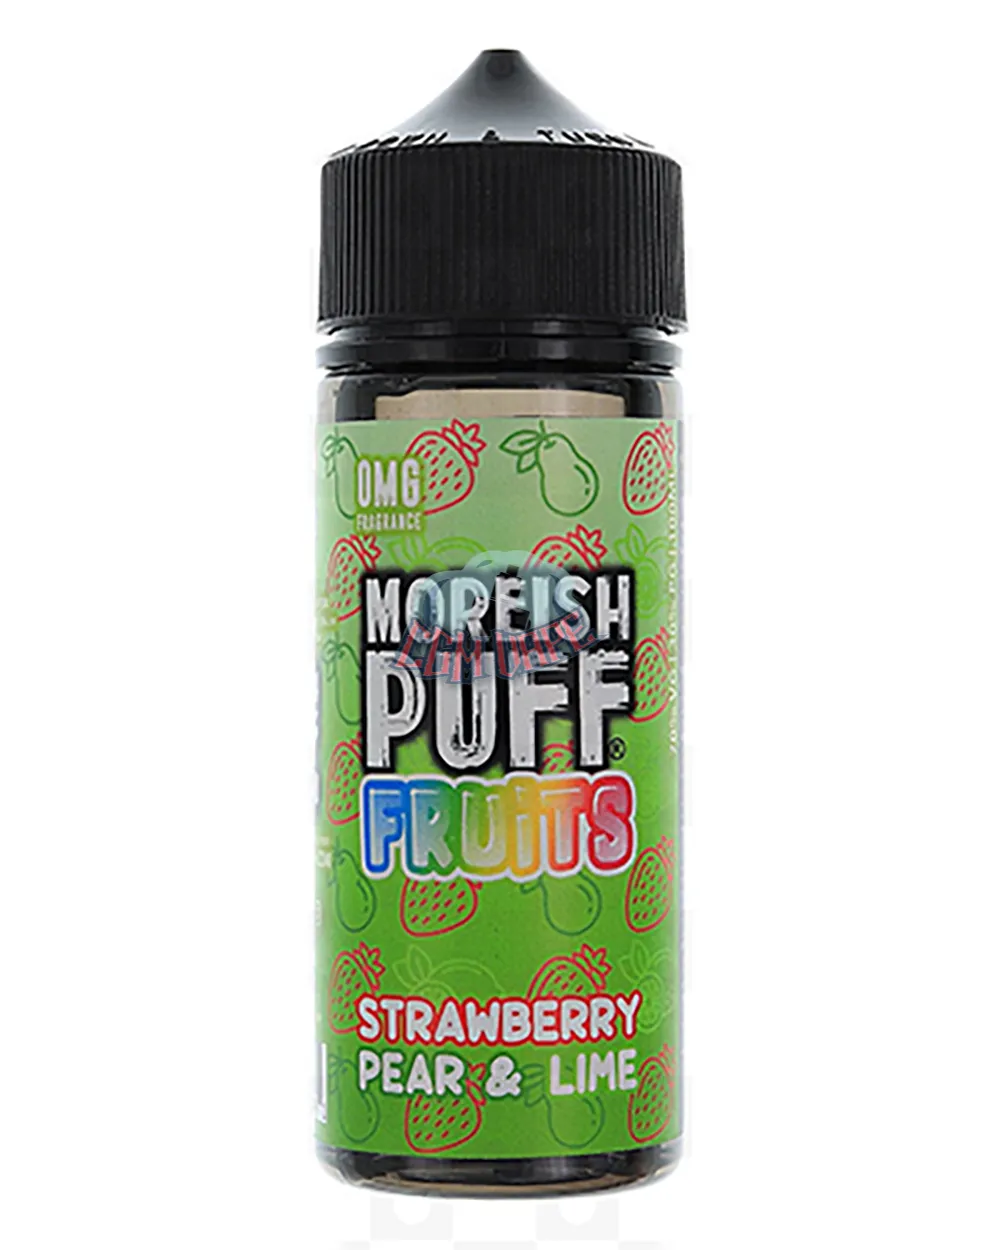 Moreish Puff Fruits Strawberry Pear & Lime